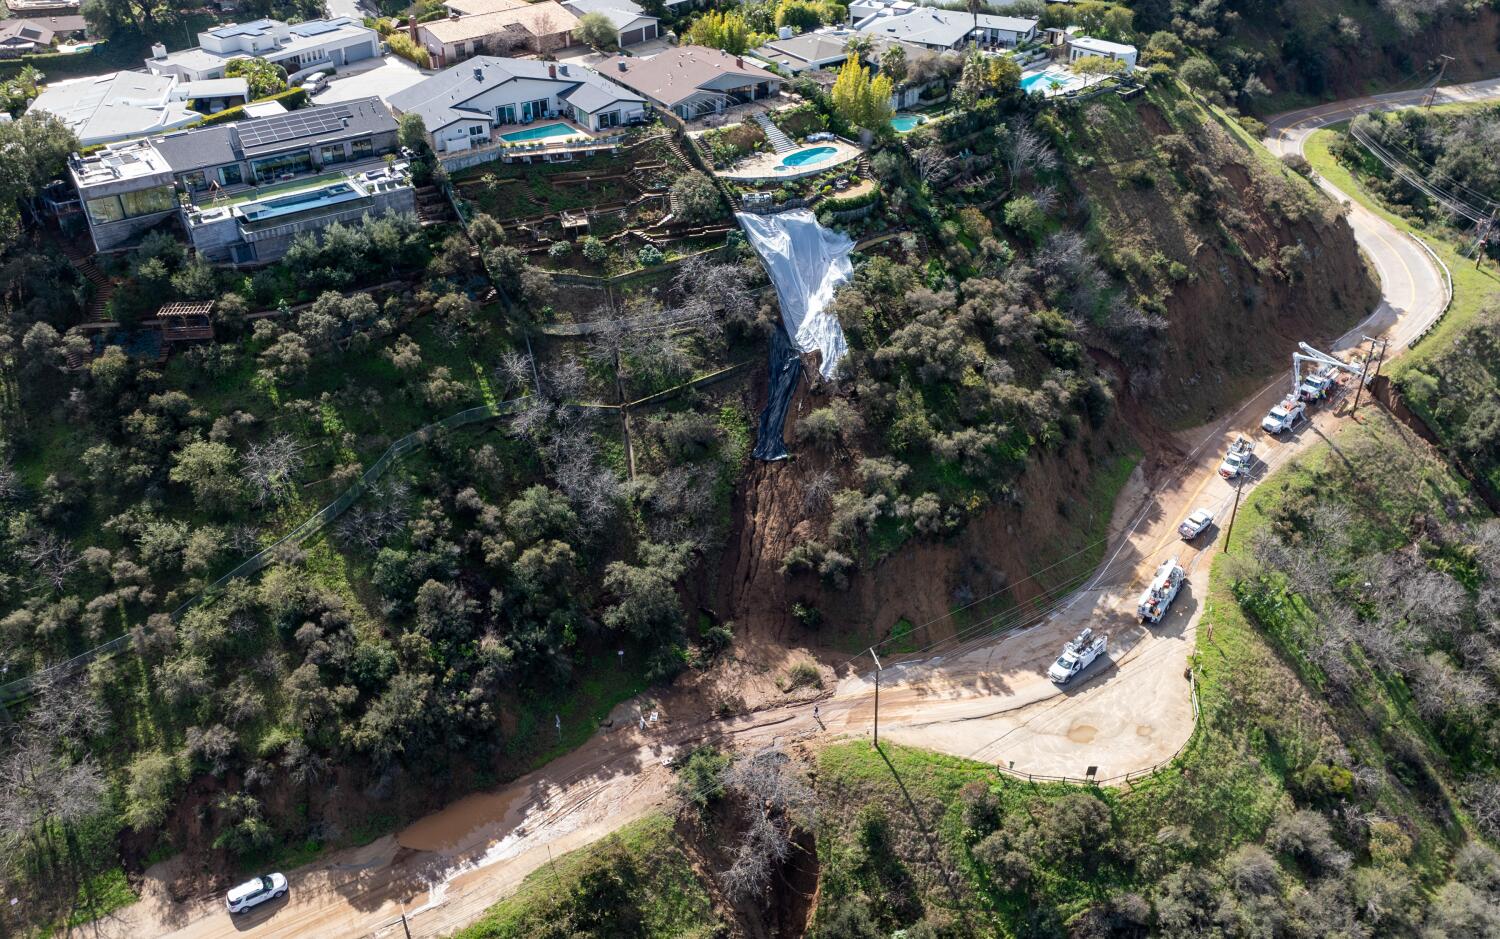 A portion of Mulholland Drive, damaged by mudslides in winter storms, reopens